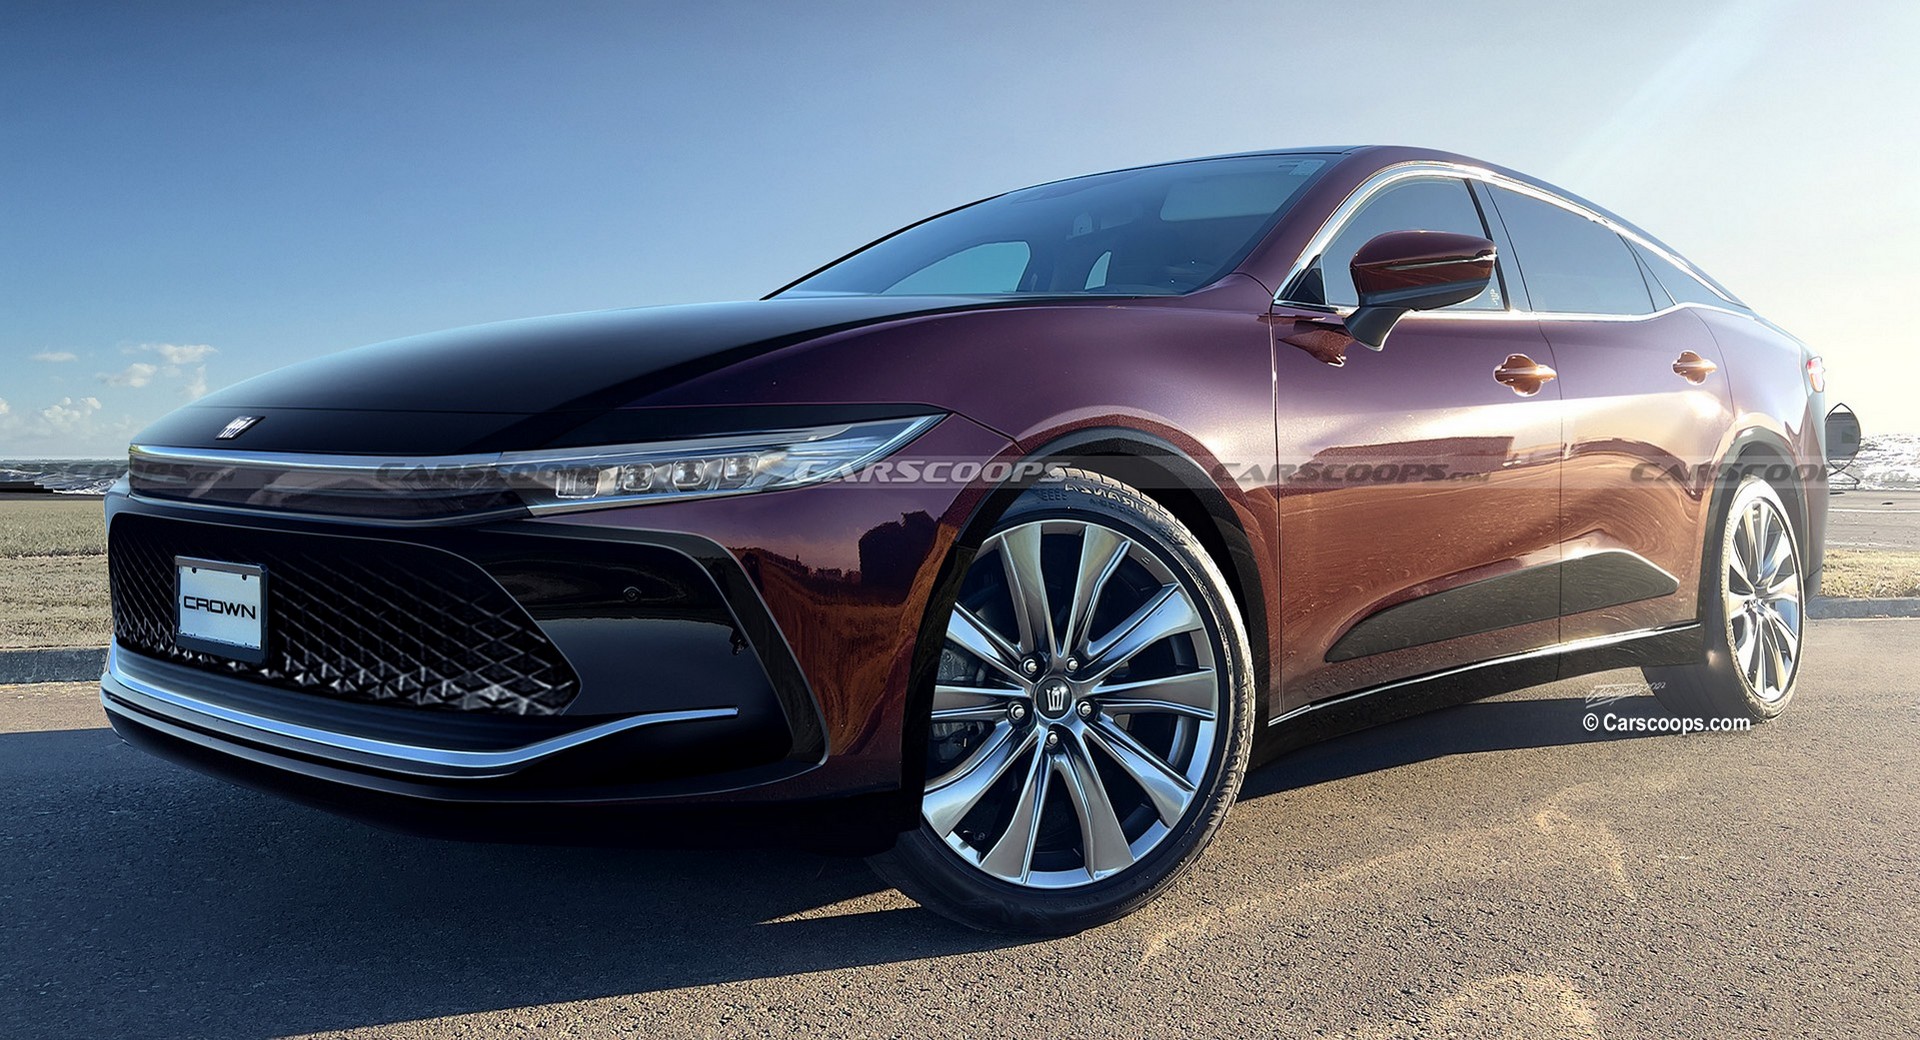 2023 Toyota Crown What It’ll Look Like, Powertrains And Everything